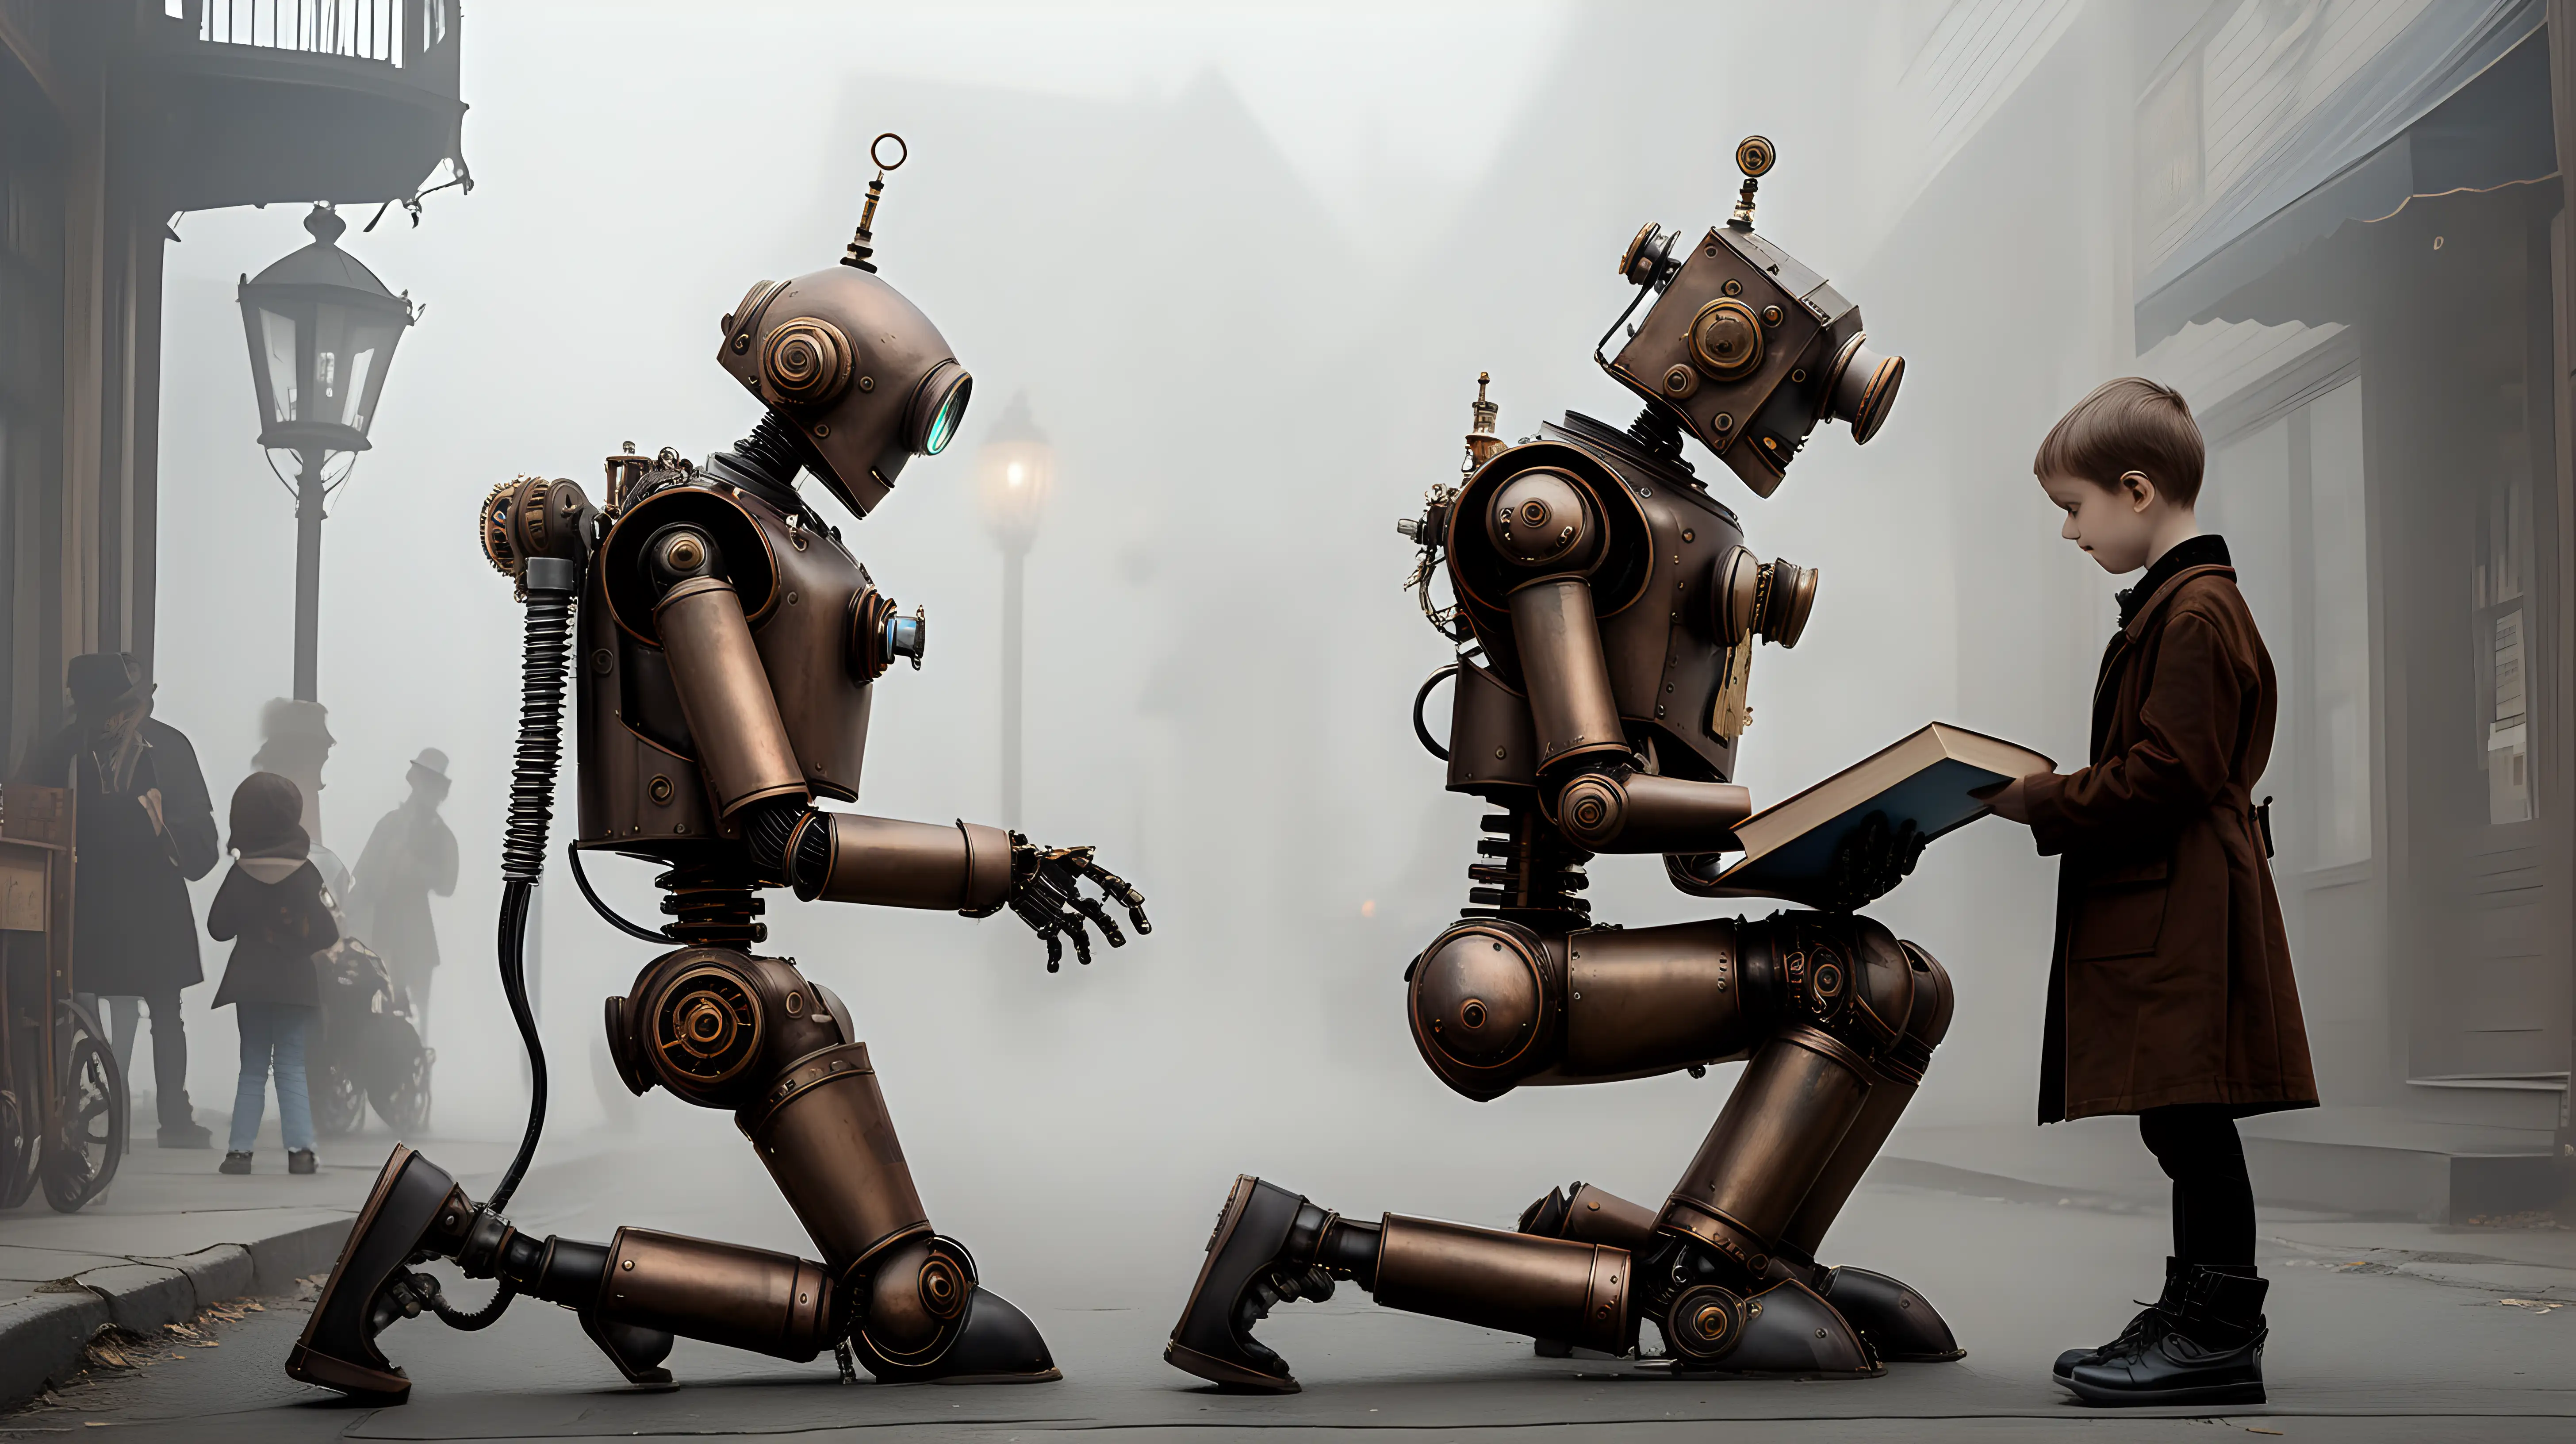 Enchanting Steampunk Robot Engages in Conversations with Child Amidst Foggy Street